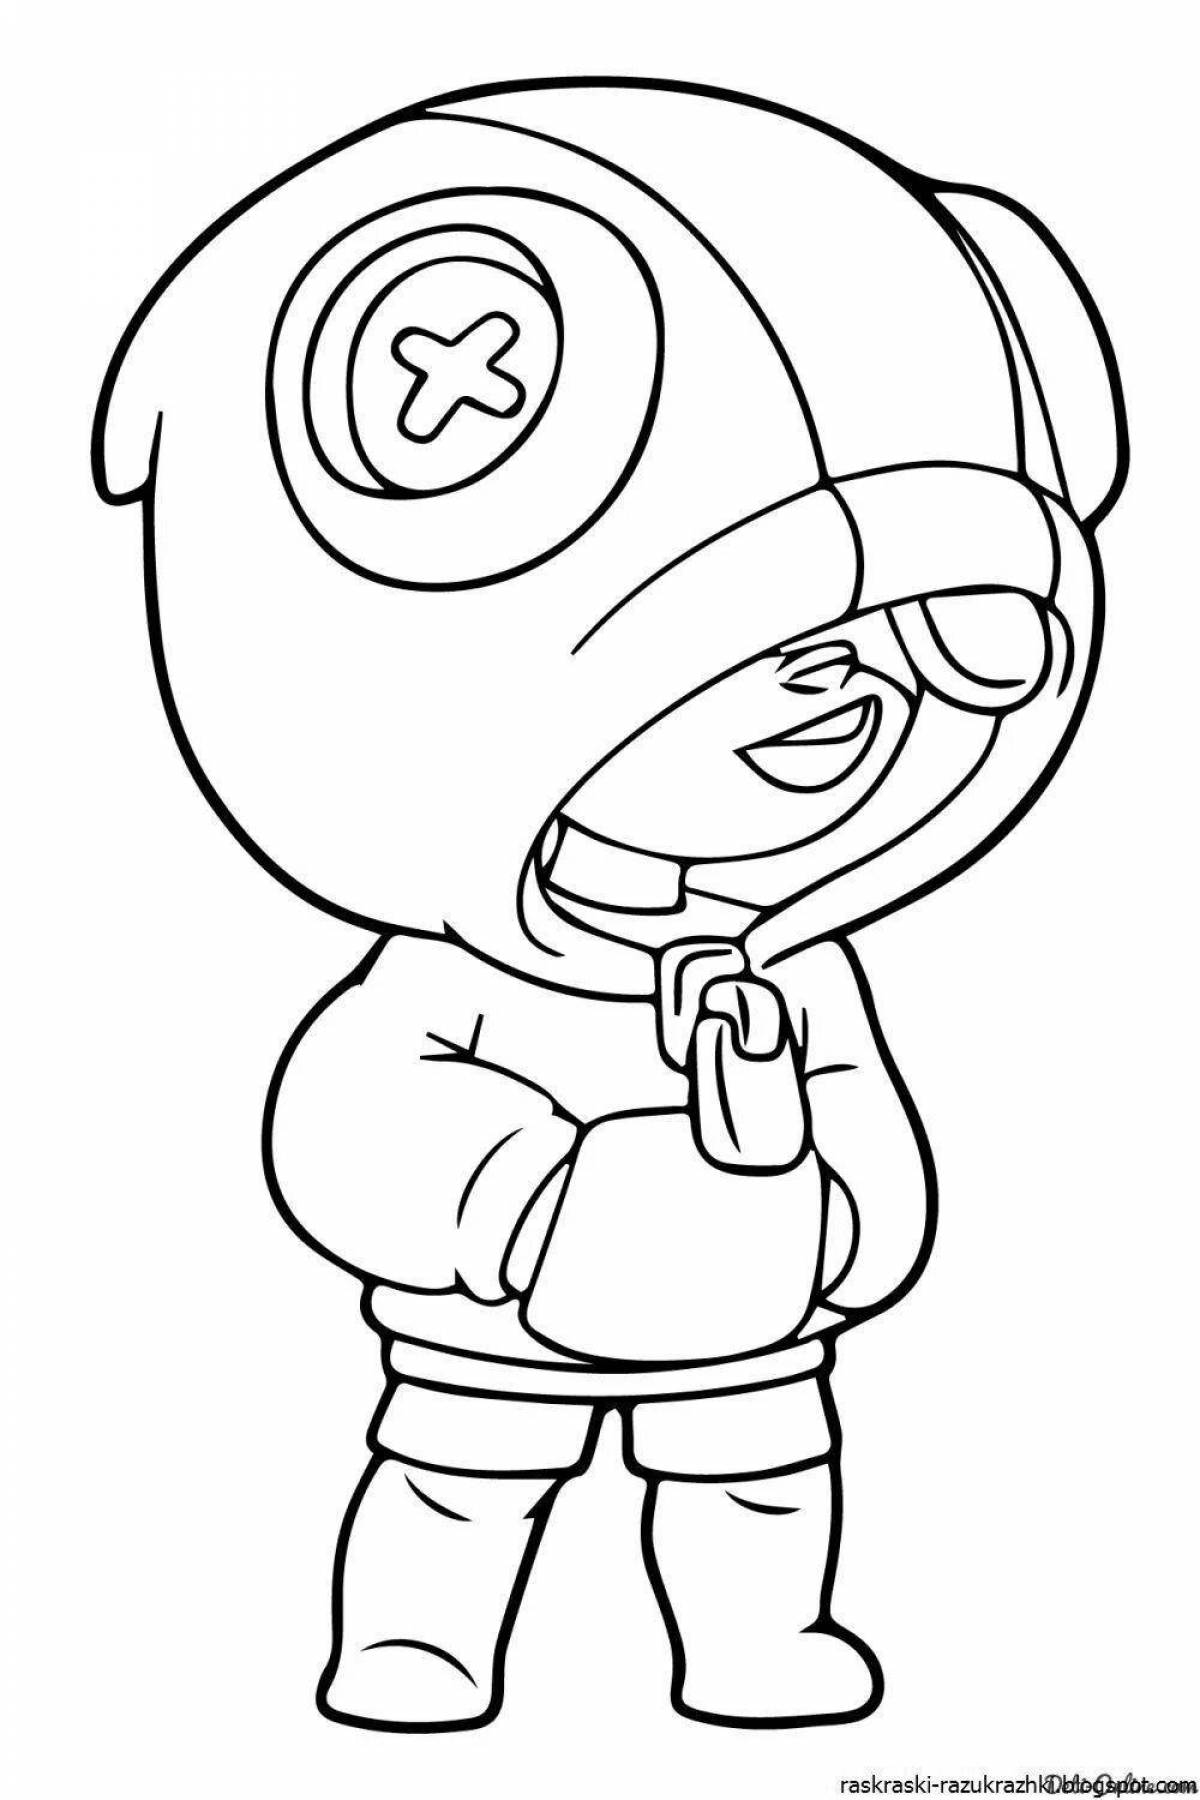 Fan from brawl stars awesome coloring book